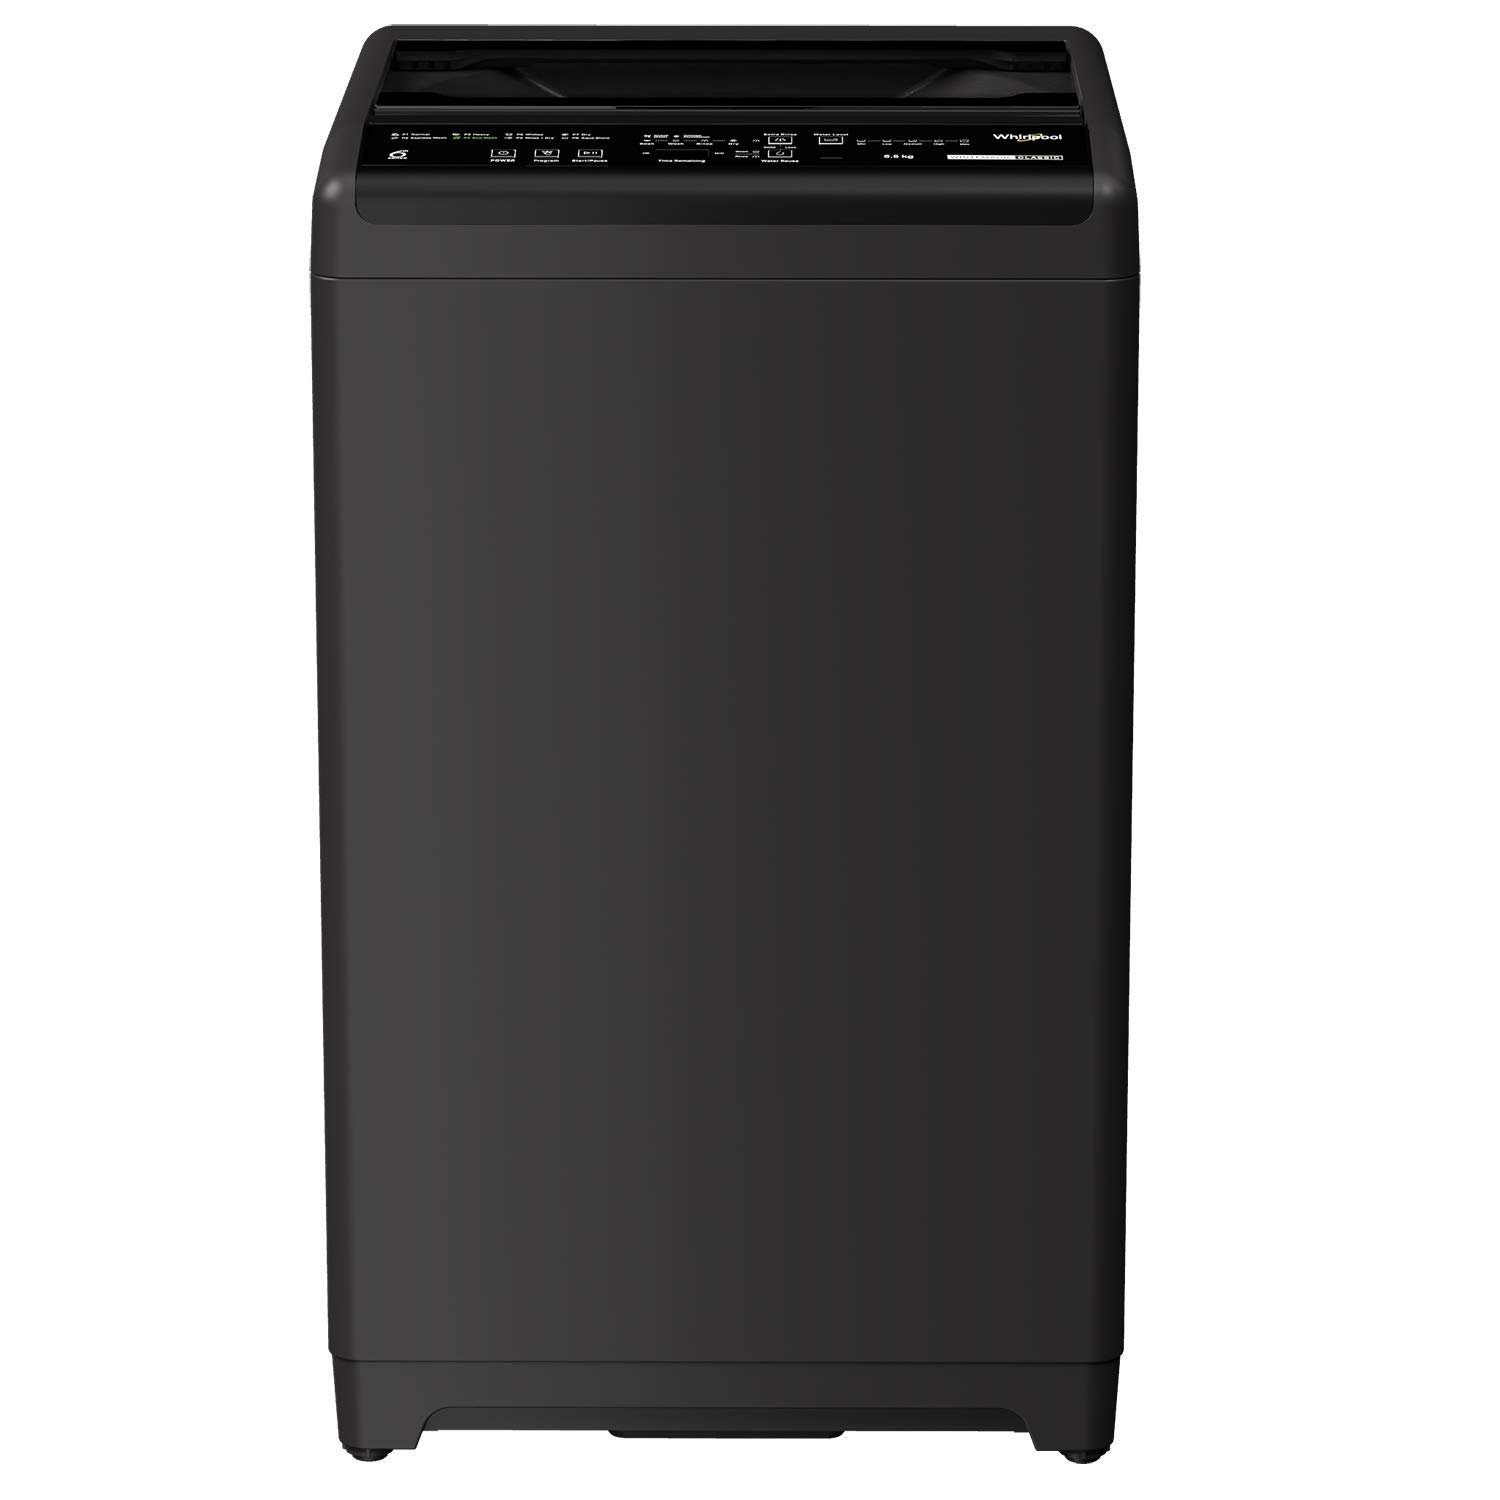 Whirlpool 6.5 kg top load fully automatic washing machine